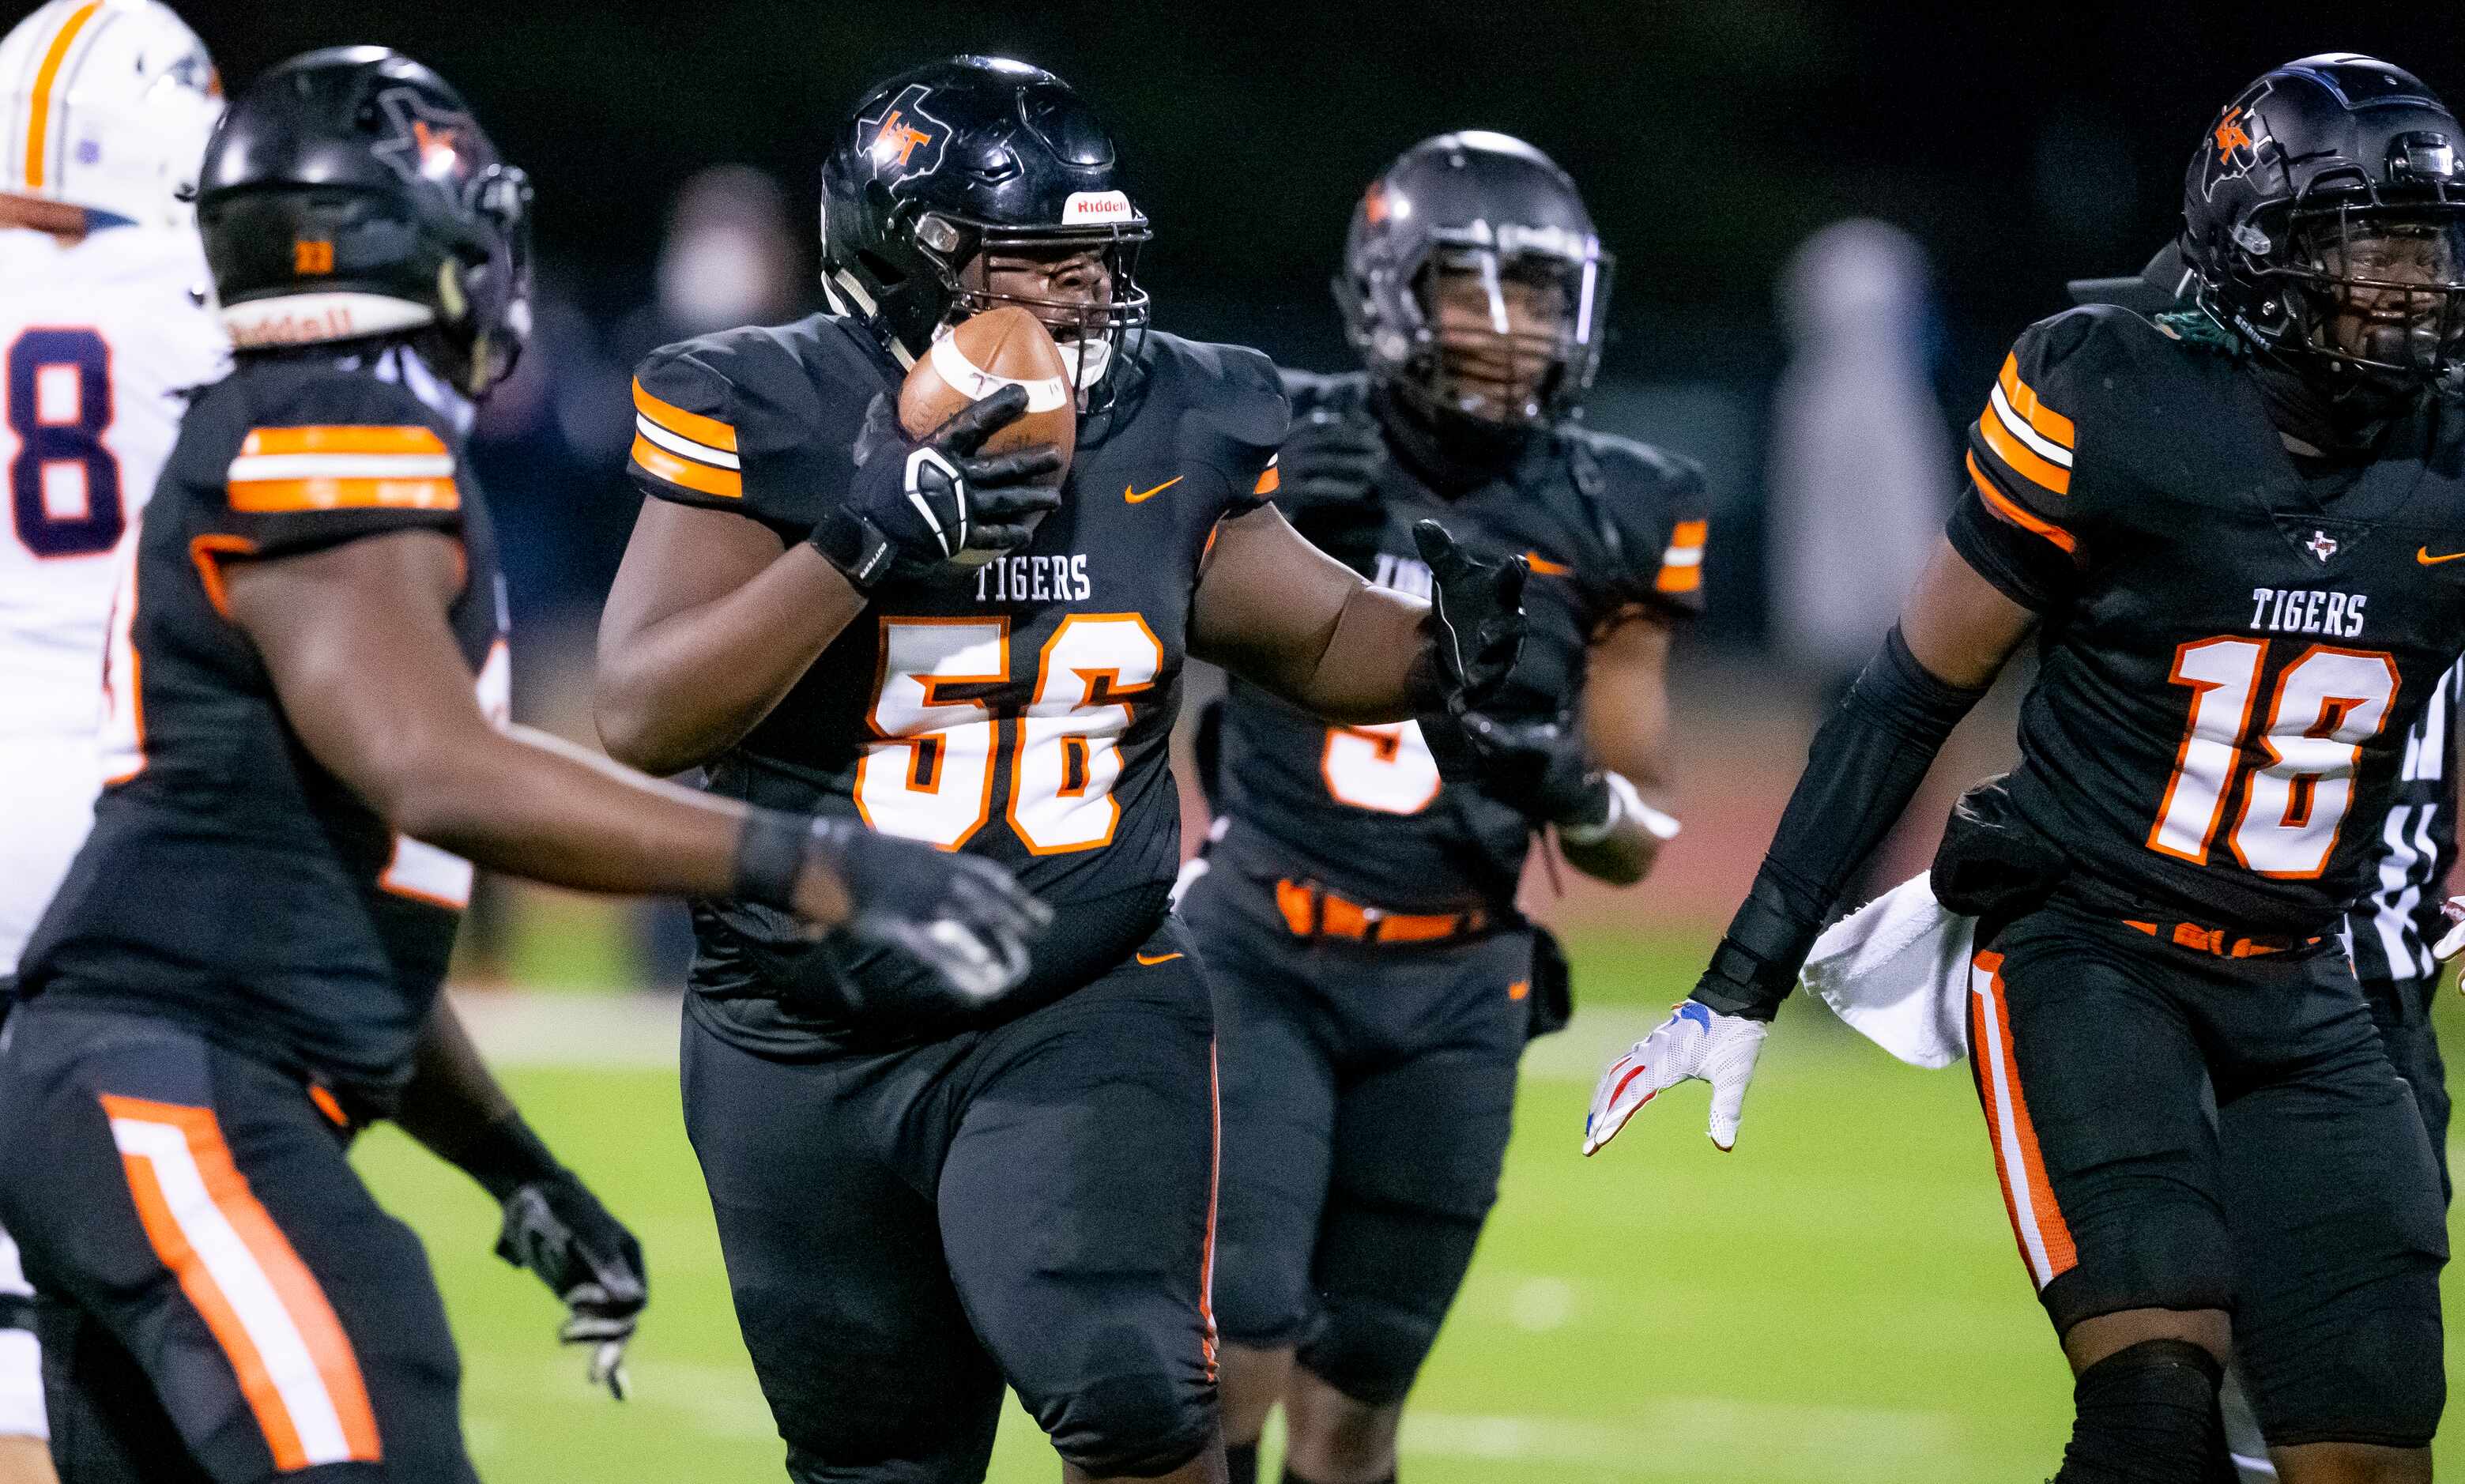 Lancaster junior defensive lineman Thomas Gort III (56) celebrates stripping and recovering...